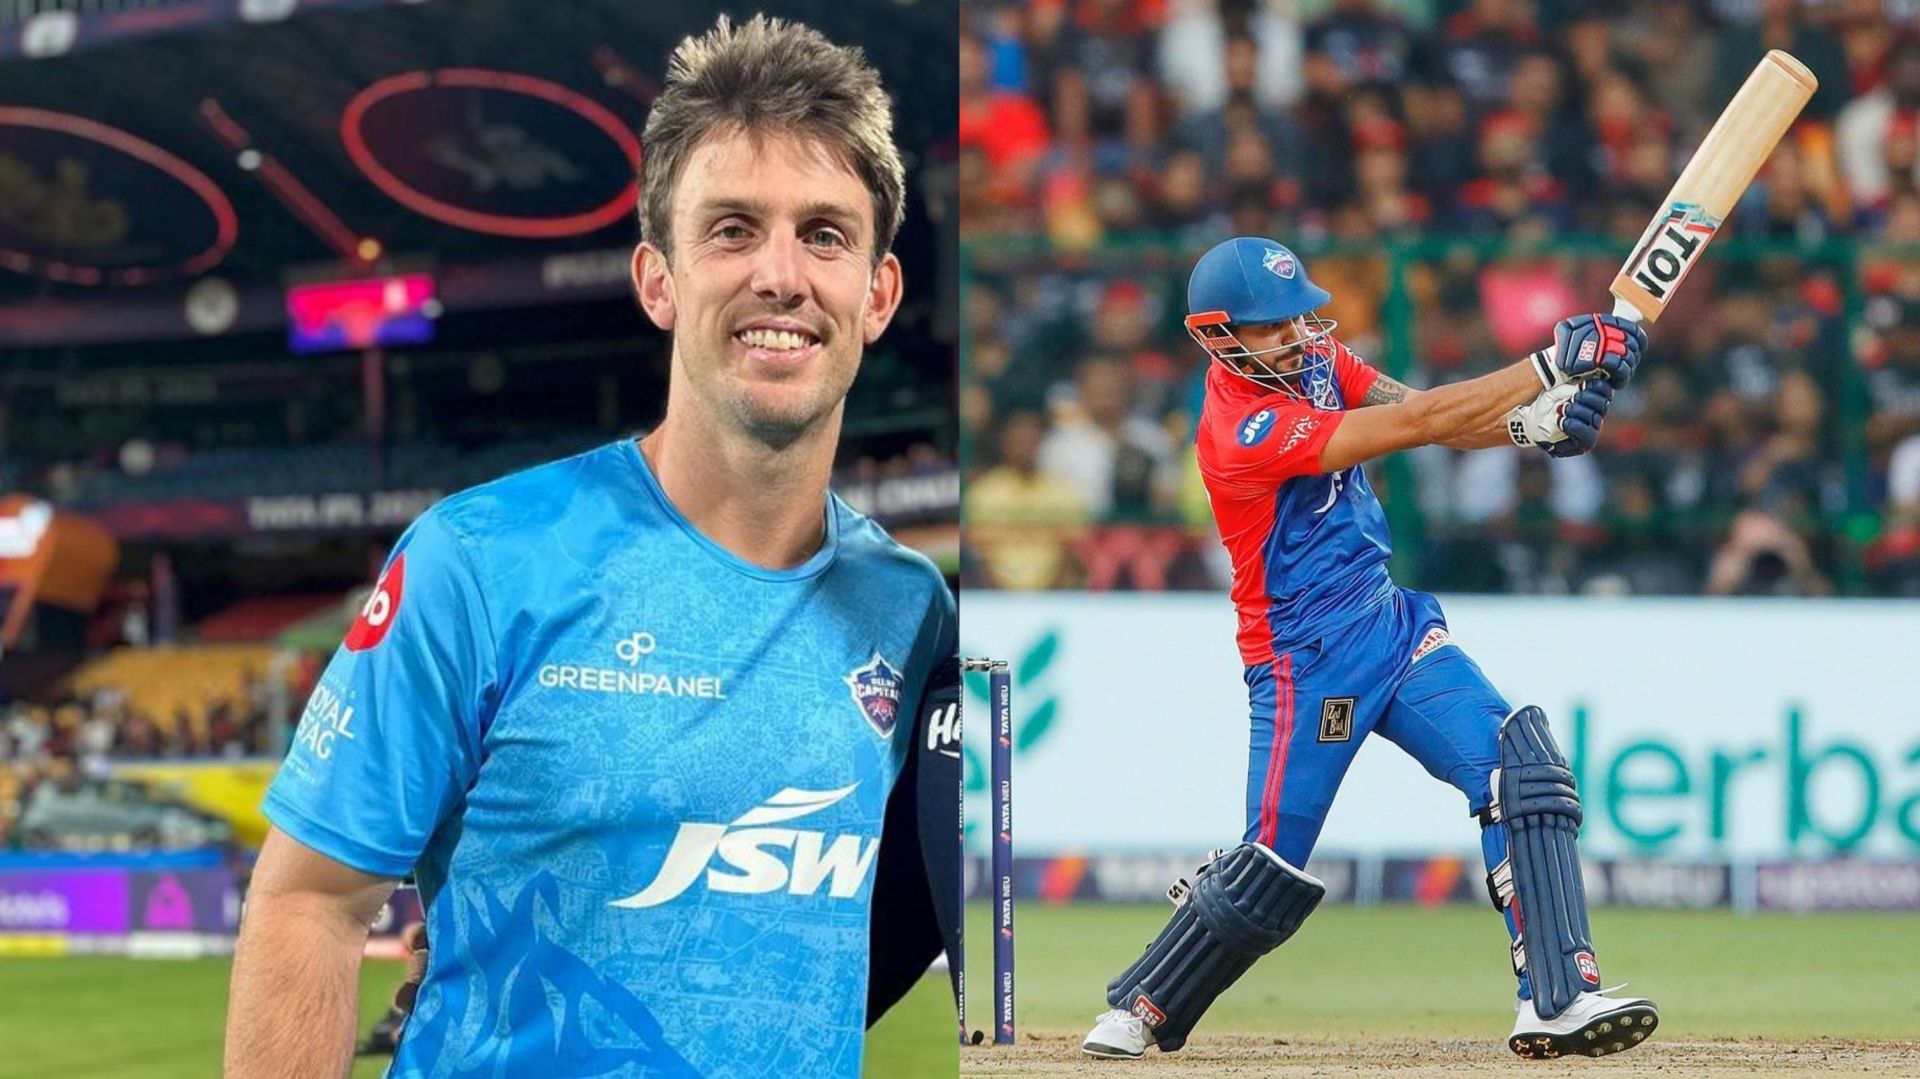 Delhi Capitals almost lost a game while chasing a 128-run target (Image: Instagram)